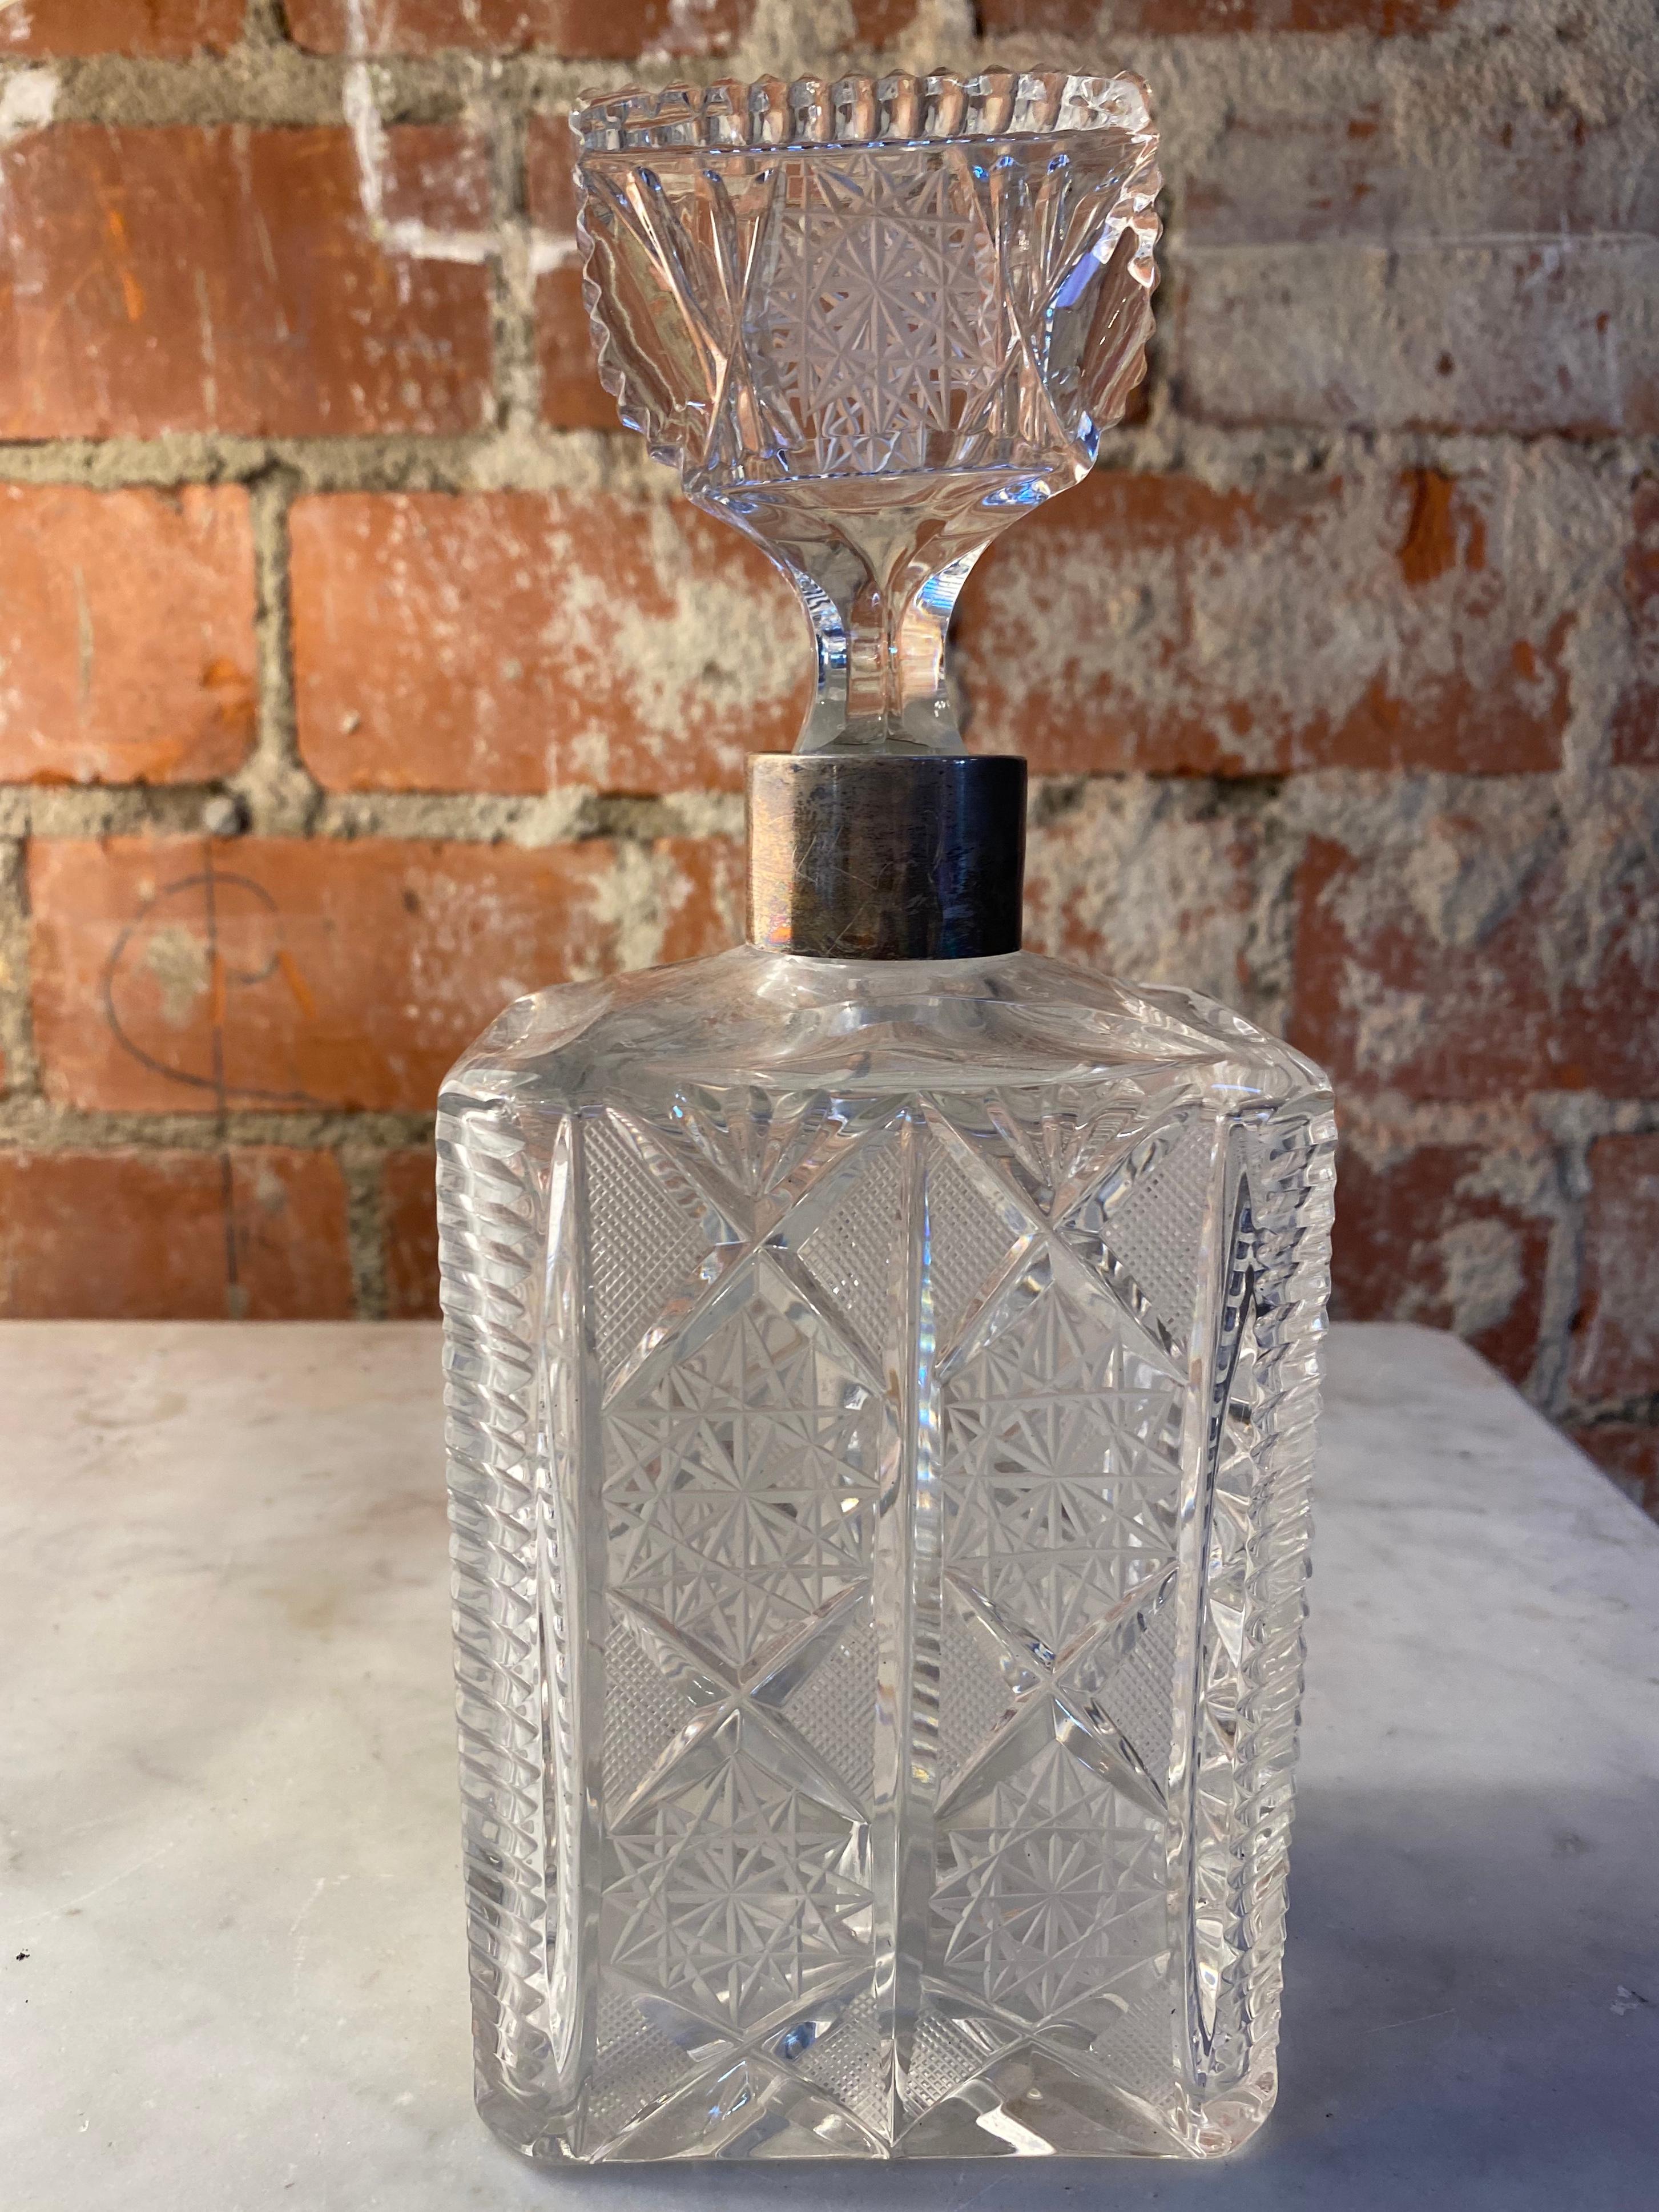 Stunning Italian crystal decorative bottle made in Italy 1940s.